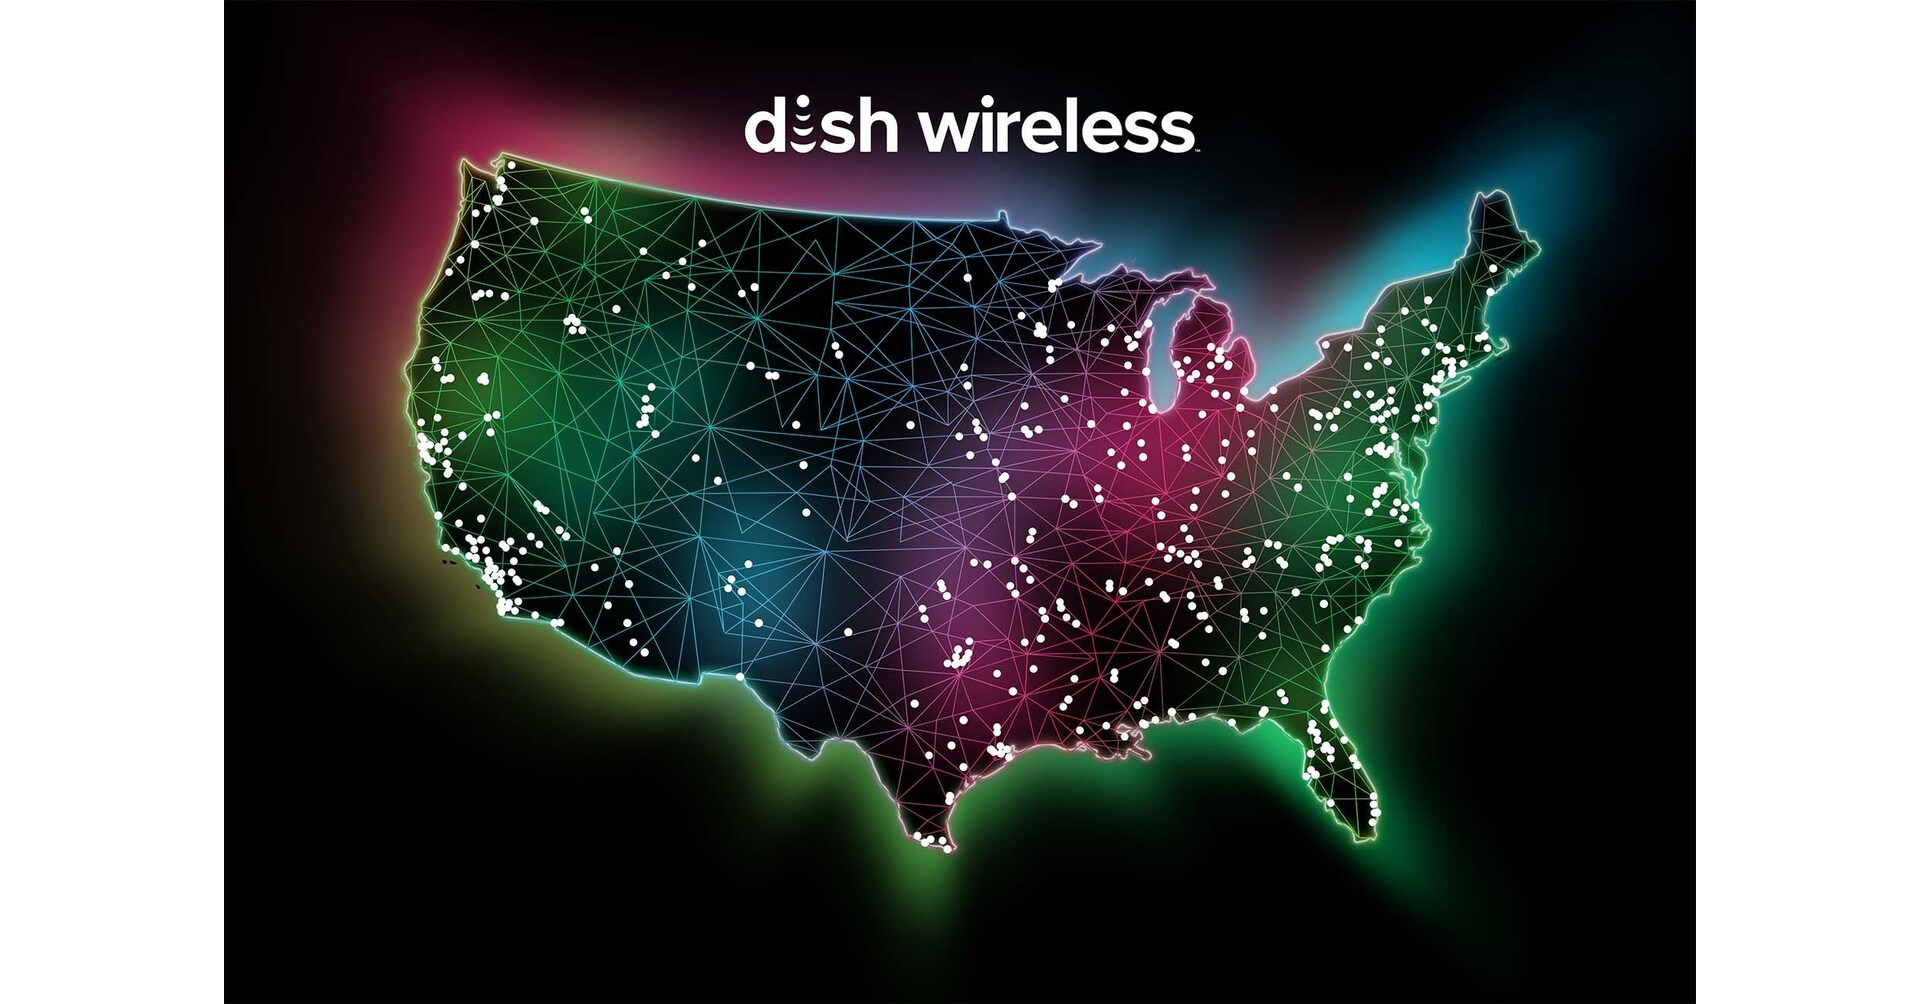 about.dish.com